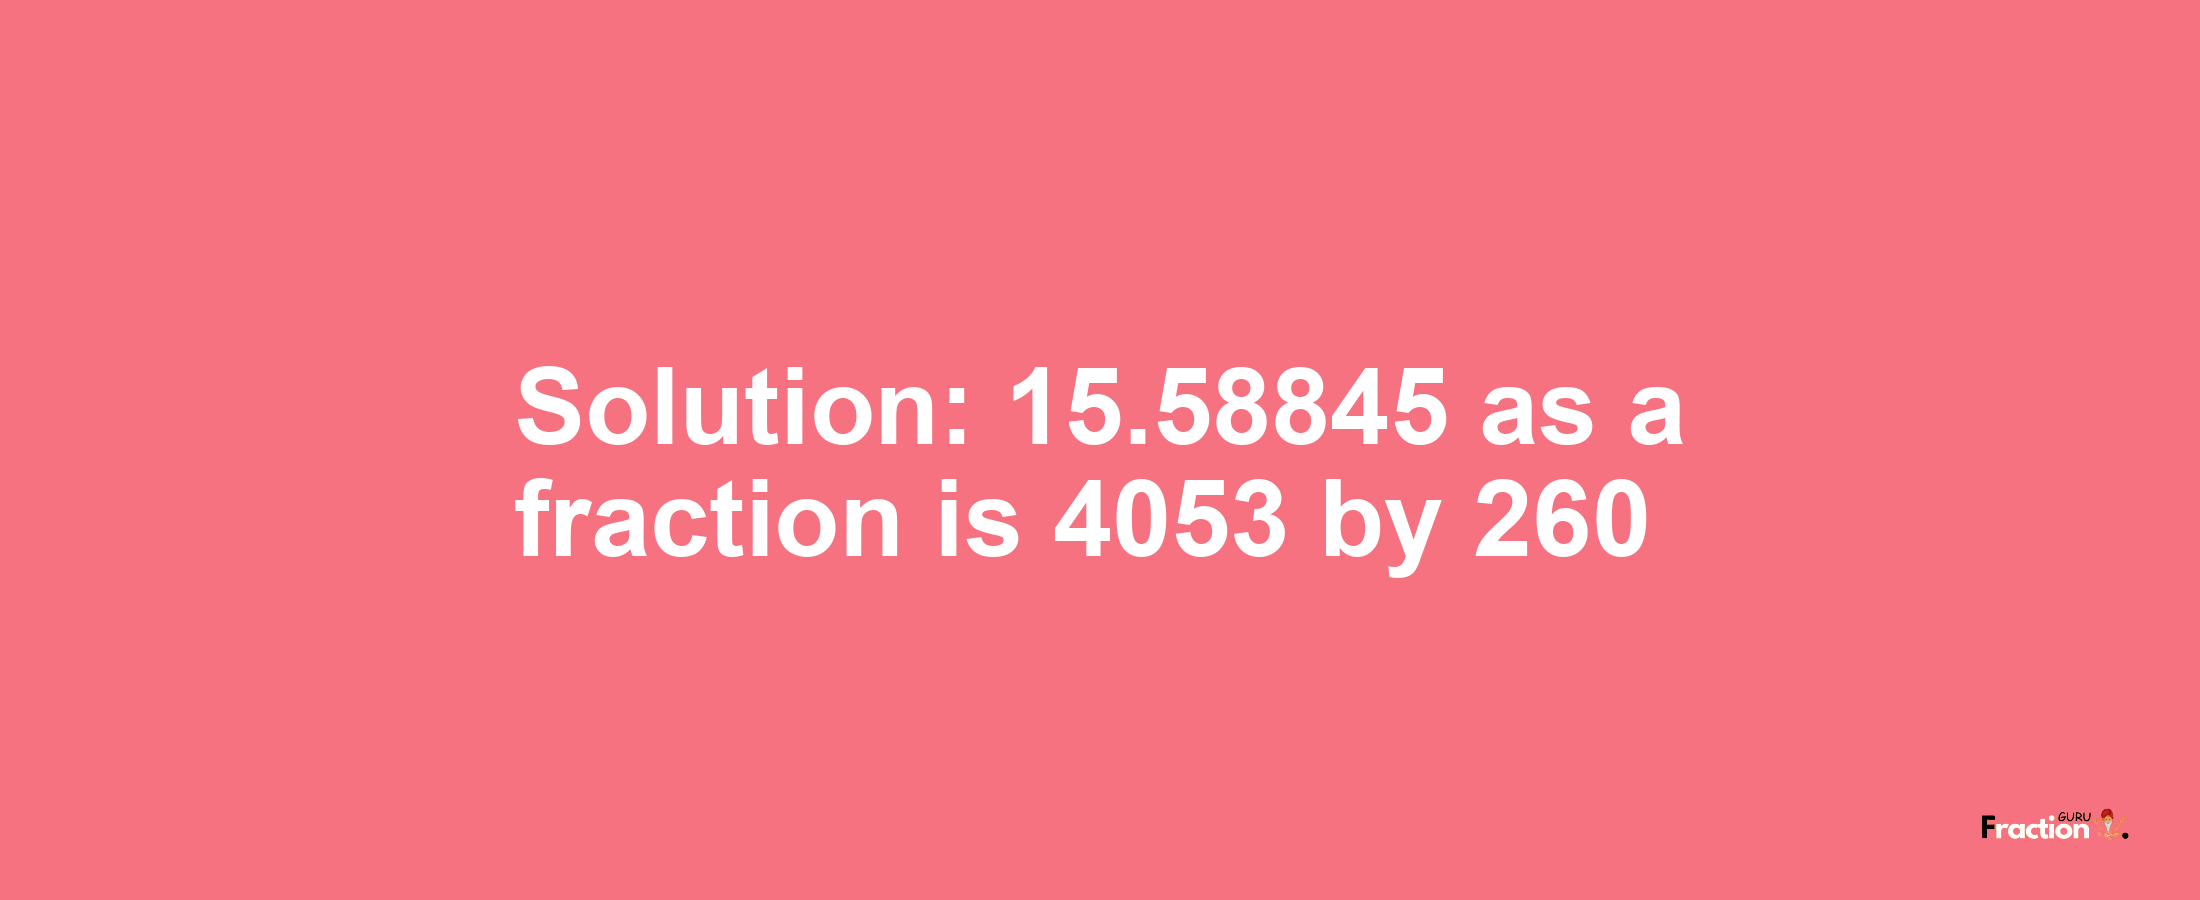 Solution:15.58845 as a fraction is 4053/260